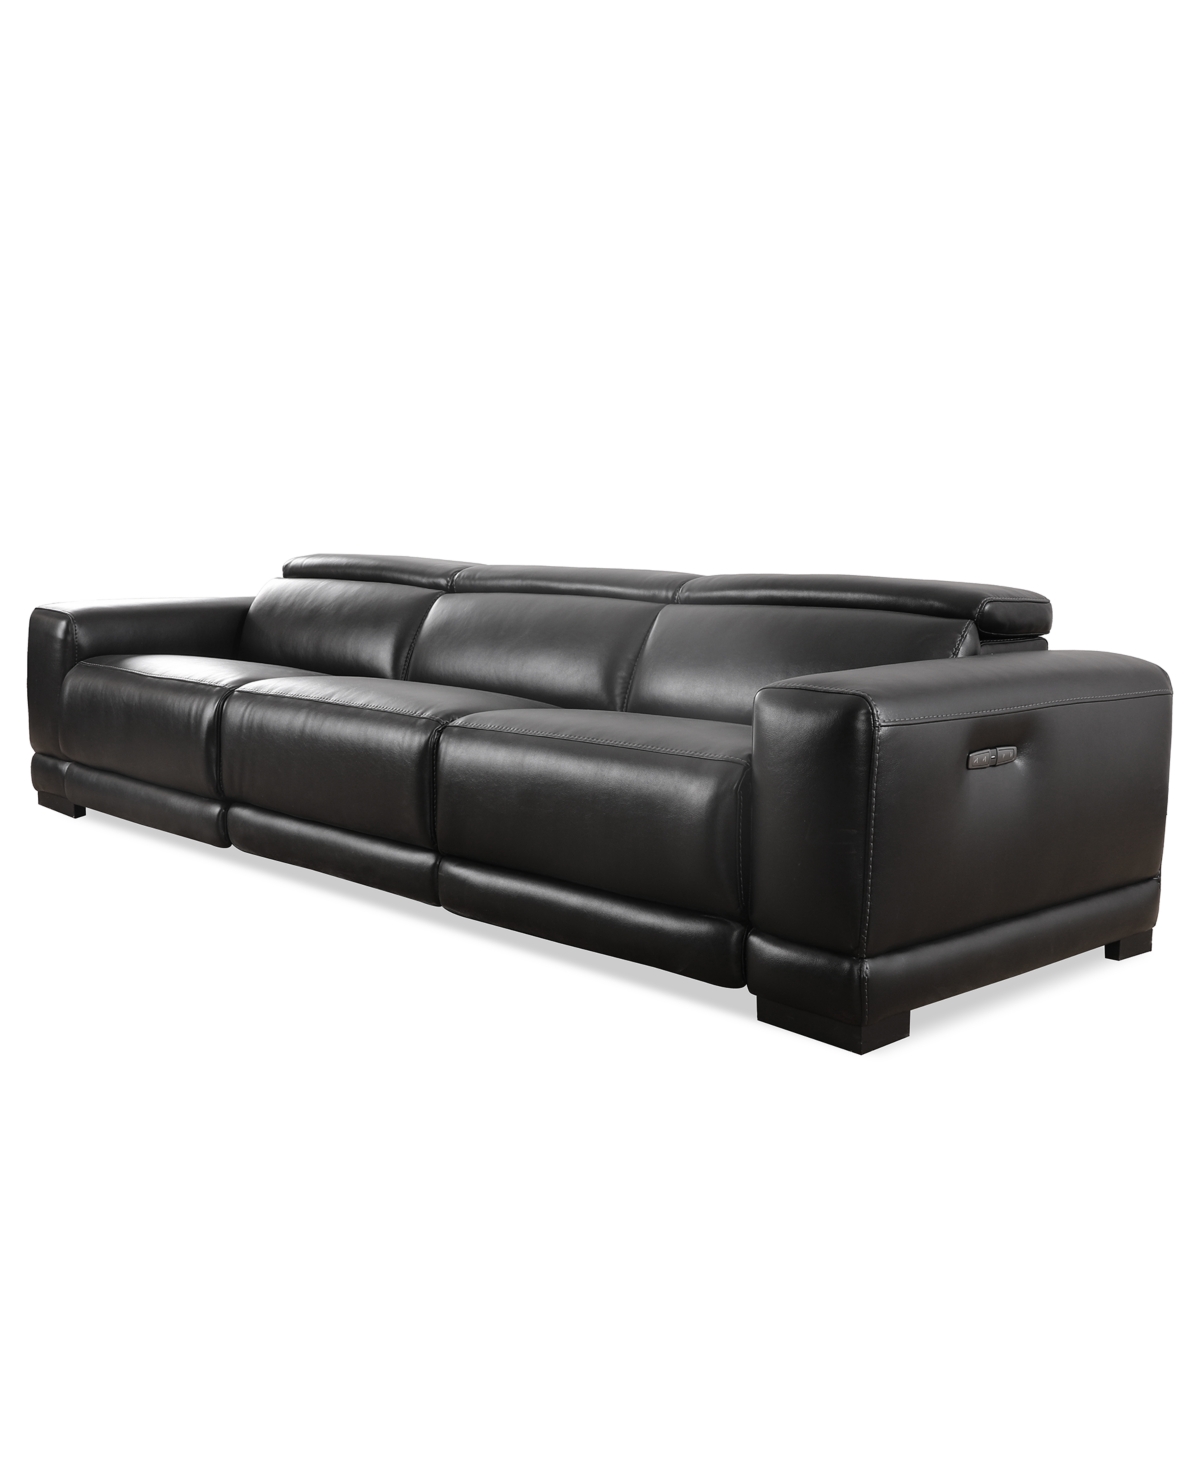 Furniture Krofton 3-pc. Beyond Leather Fabric Sofa With 3 Power Motion Recliners, Created For Macy's In Blackberry